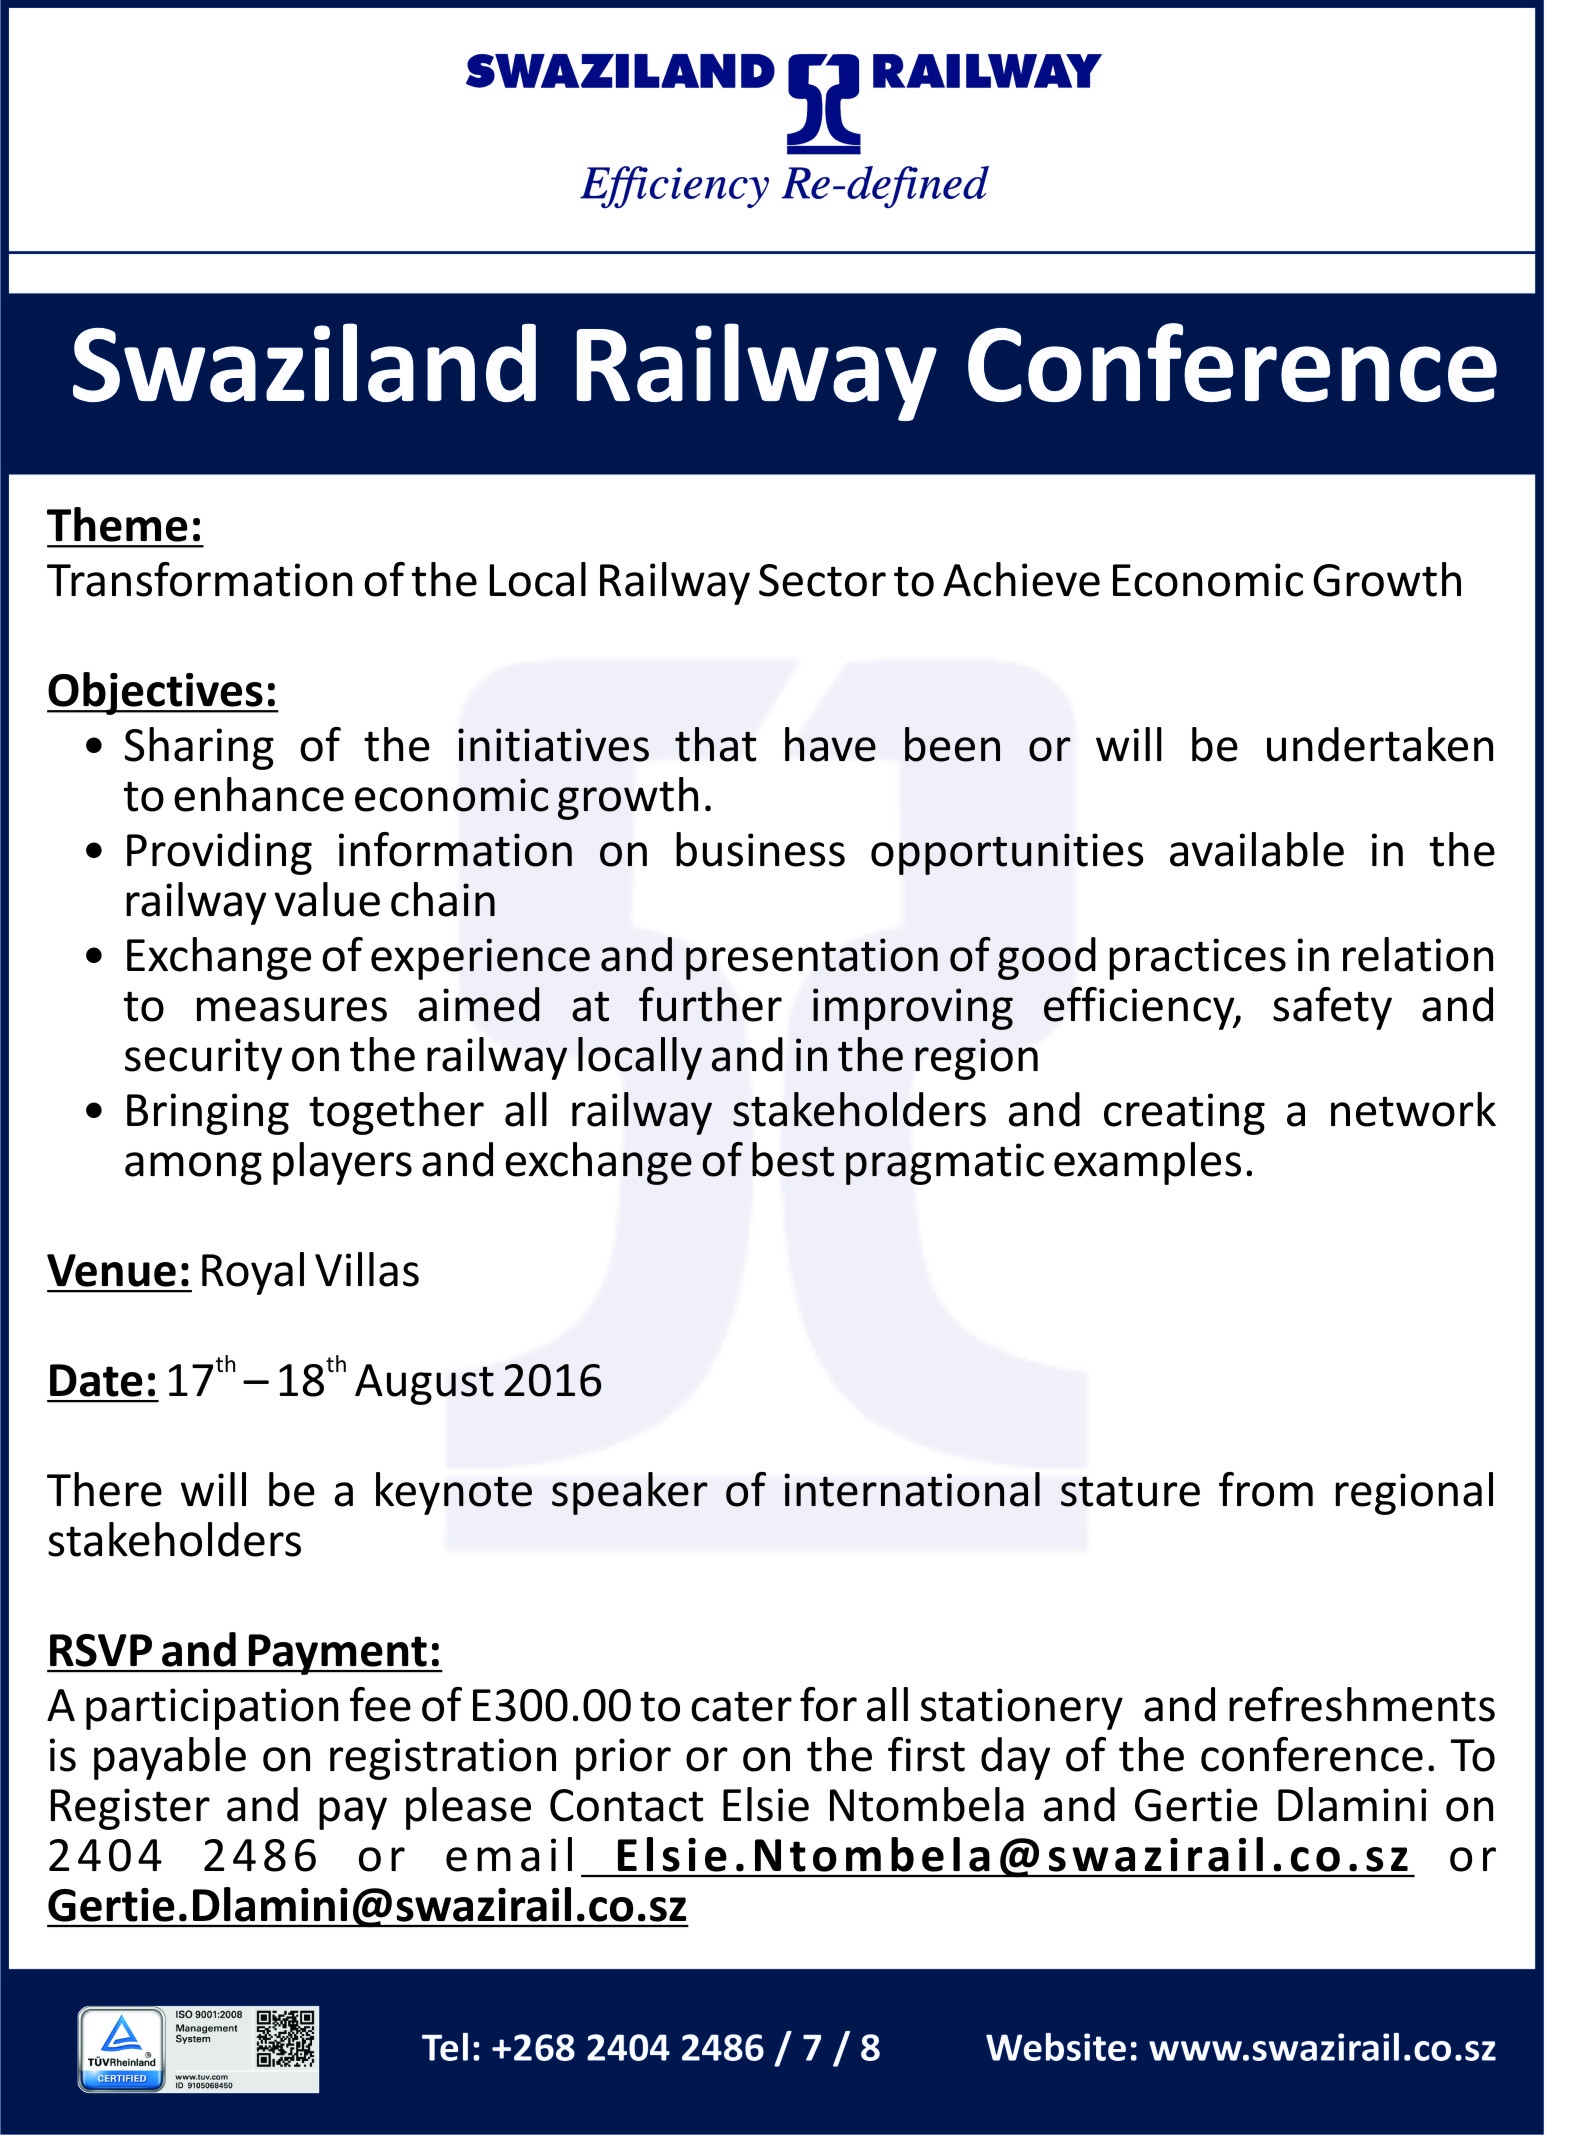 Swaziland Railway 2nd Local Rail Conference - 17 to 18 August 2016